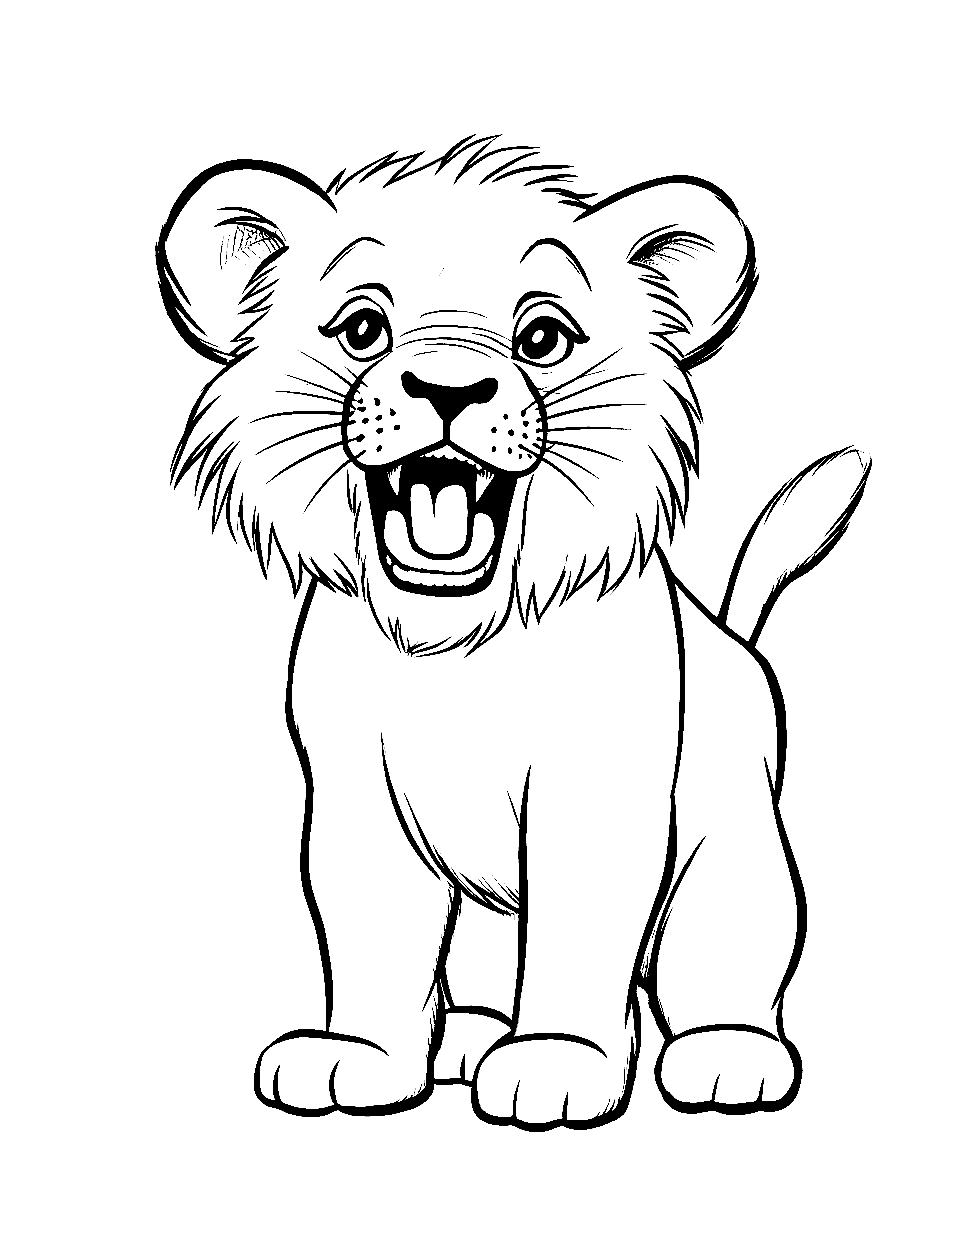 Baby Lion's First Roar Coloring Page - A baby lion trying to roar but sounding more like a meow.